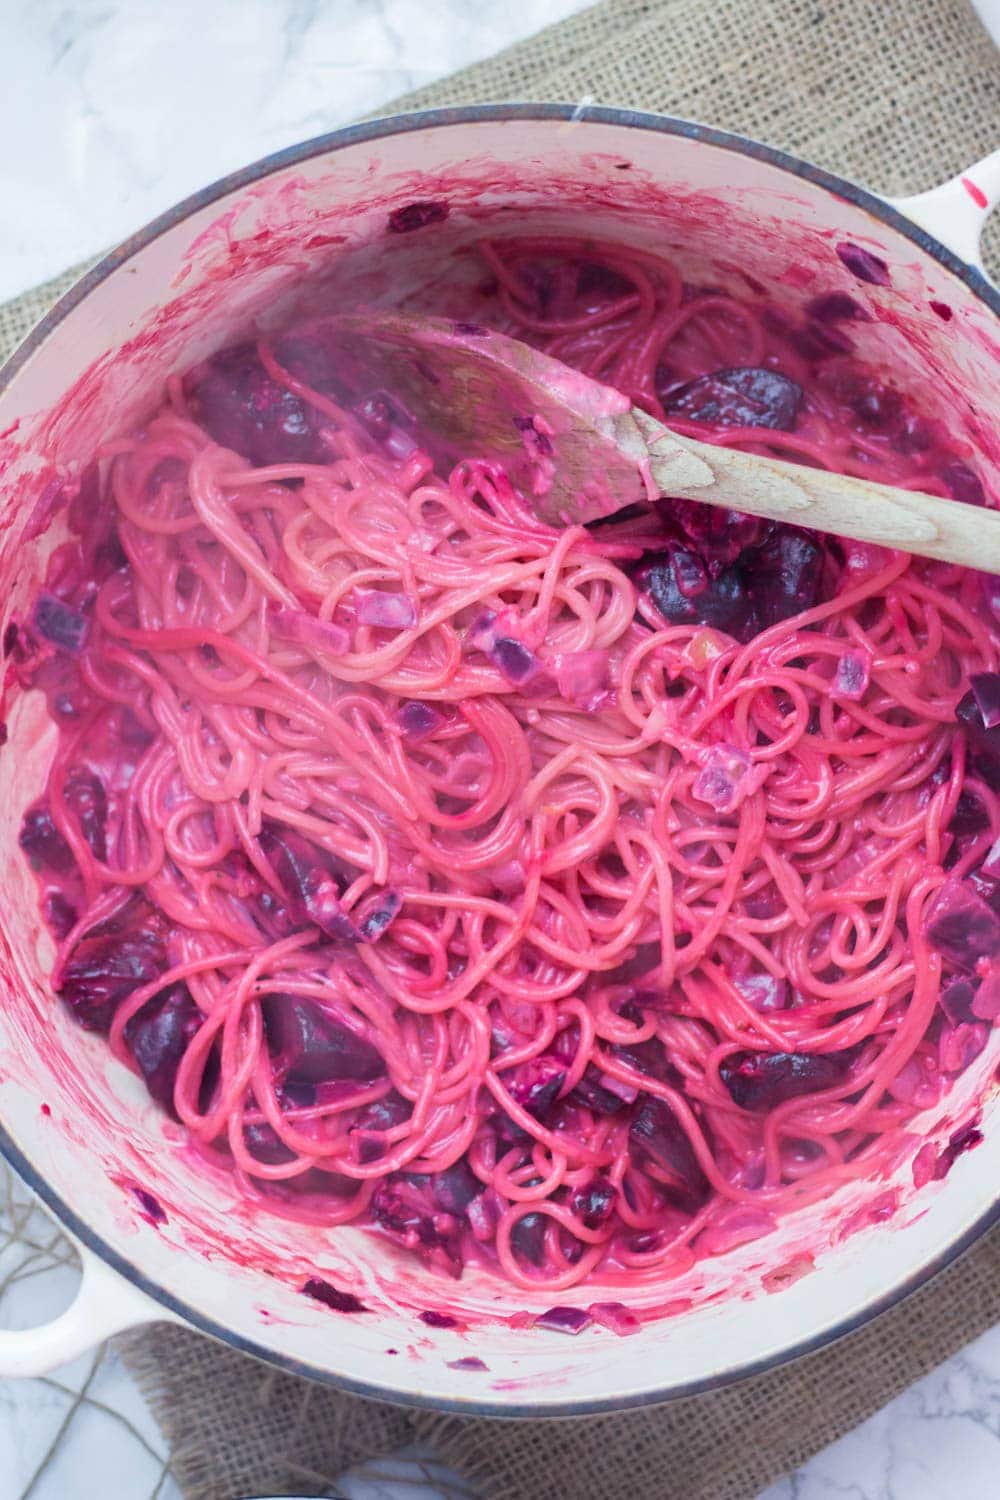 This roasted beetroot one-pot pasta is finished with a spoonful of goat's cheese. It's so easy and looks amazing, this dish is perfect comfort food! #beetroot #pasta #vegetarian #comfortfood